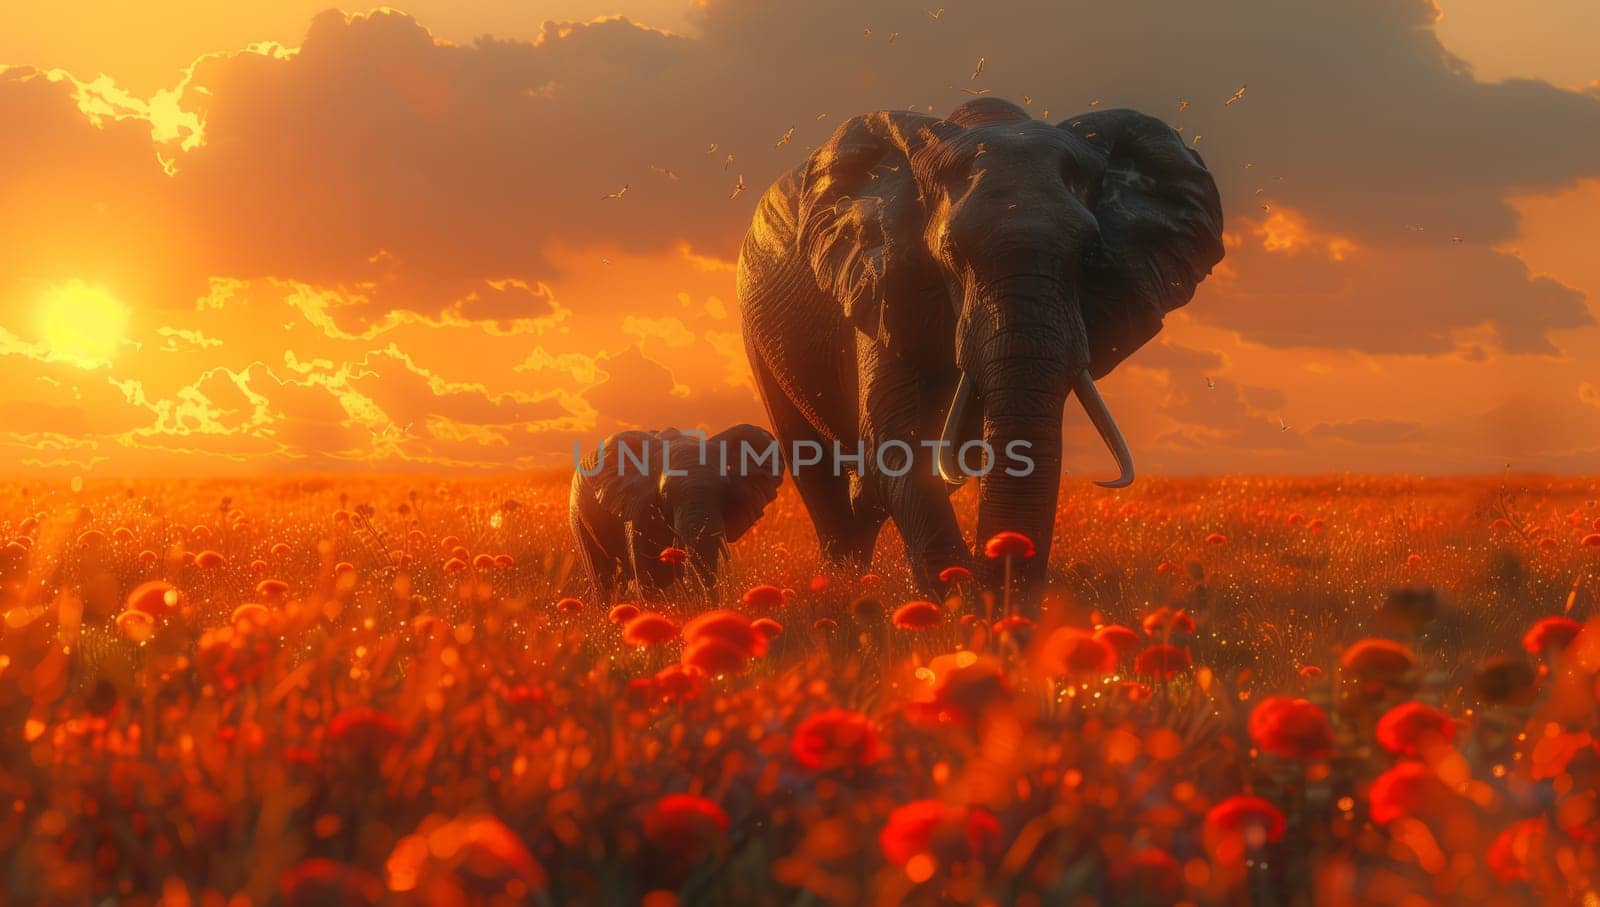 Two elephants strolling through a field of red flowers at sunset by richwolf